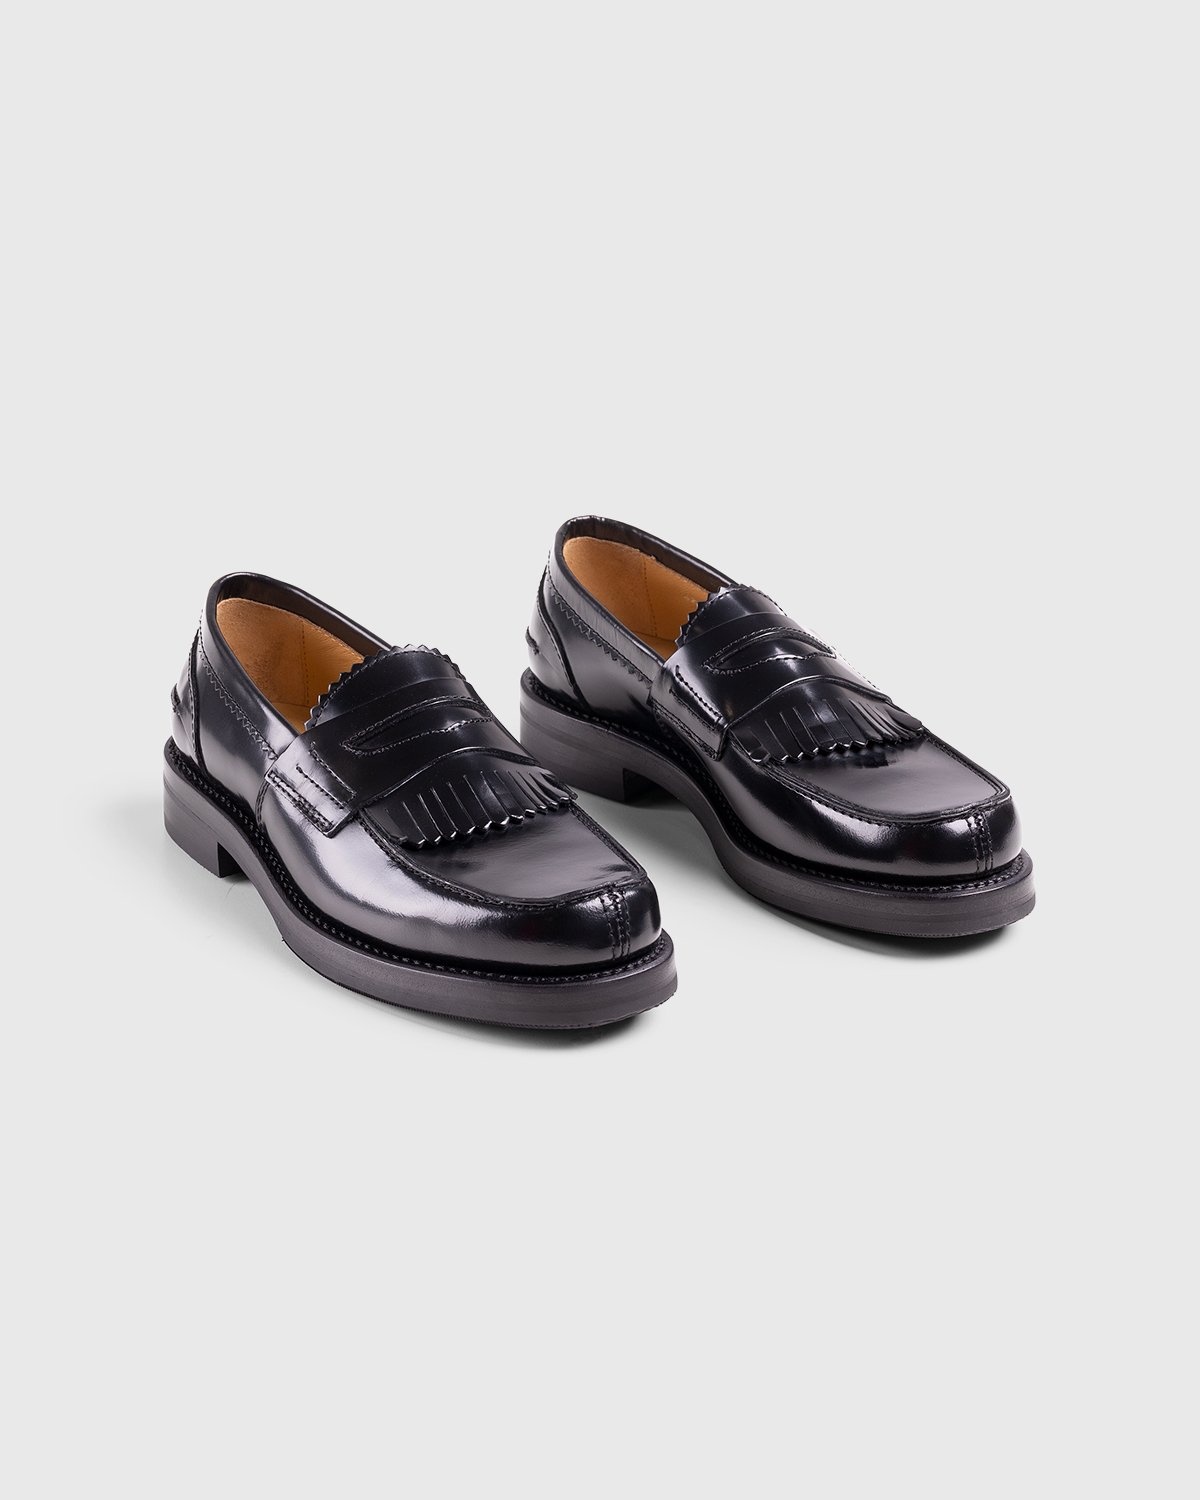 Our Legacy – Penny Loafer Black Leather - Shoes - Black - Image 3